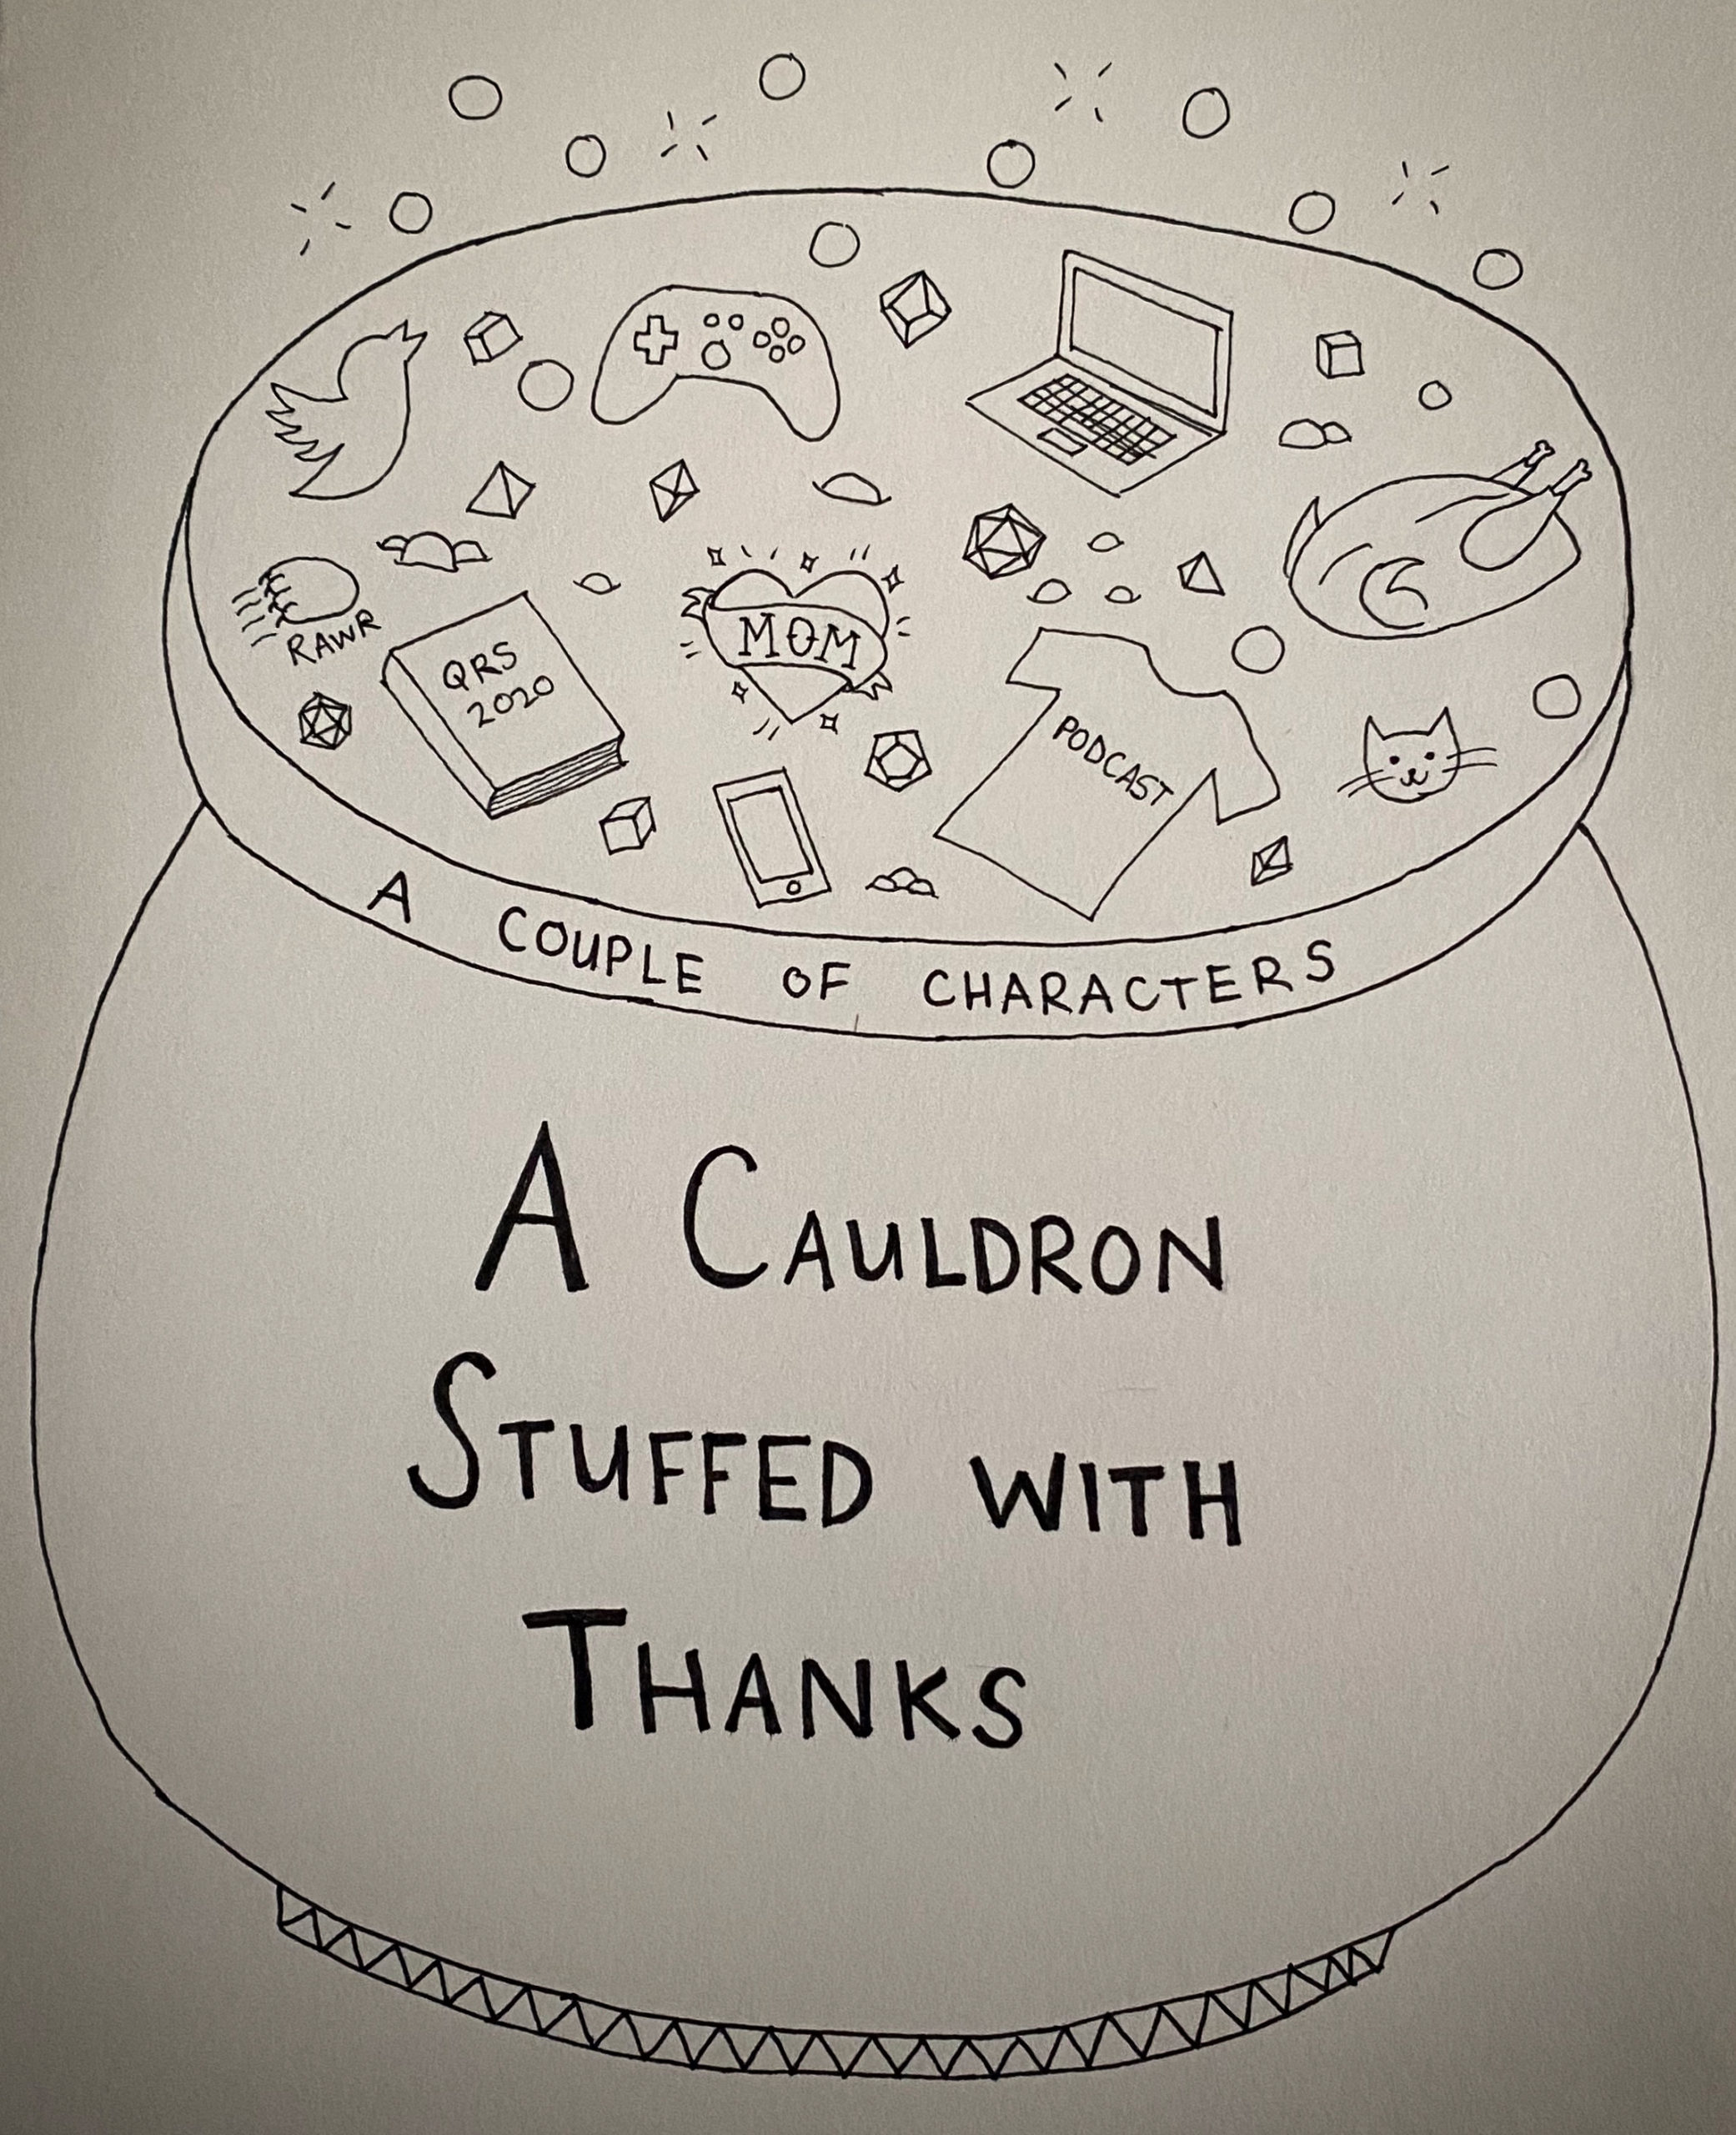 A bubbling cauldron with "A Cauldron Stuffed with Thanks" written on the side. Written on the rim of the cauldron is "A Couple of Characters". Inside the cauldron are polyhedral dice, a sparkling tattoo of a heart wrapped with a banner that says "Mom", a cat face, a cooked turkey, a laptop, a smartphone, a videogame controller, a clawing cat paw with "Rawr" written underneath, a T-shirt with "Podcast" written on it, an outline of a bird, and a book with "QRS 2020" written on it. Copyright: Quinn Schulte 2020.